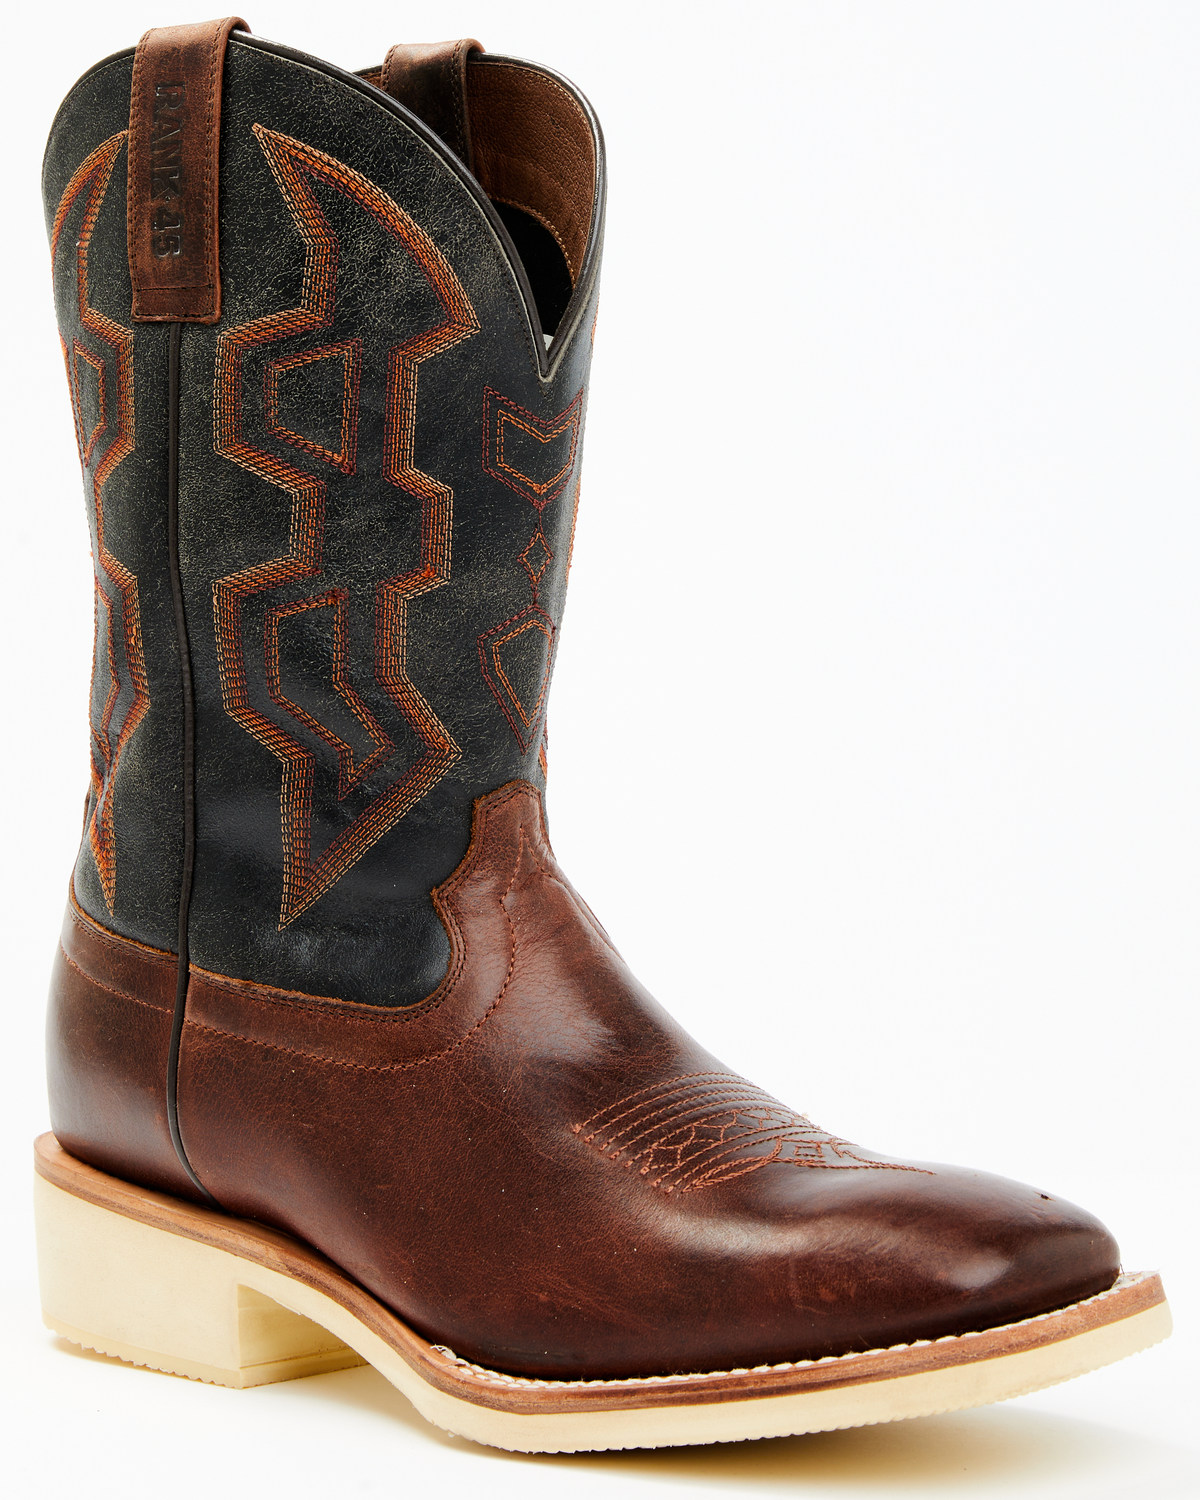 RANK 45® Men's Bullet Saddle Western Performance Boots - Broad Square Toe